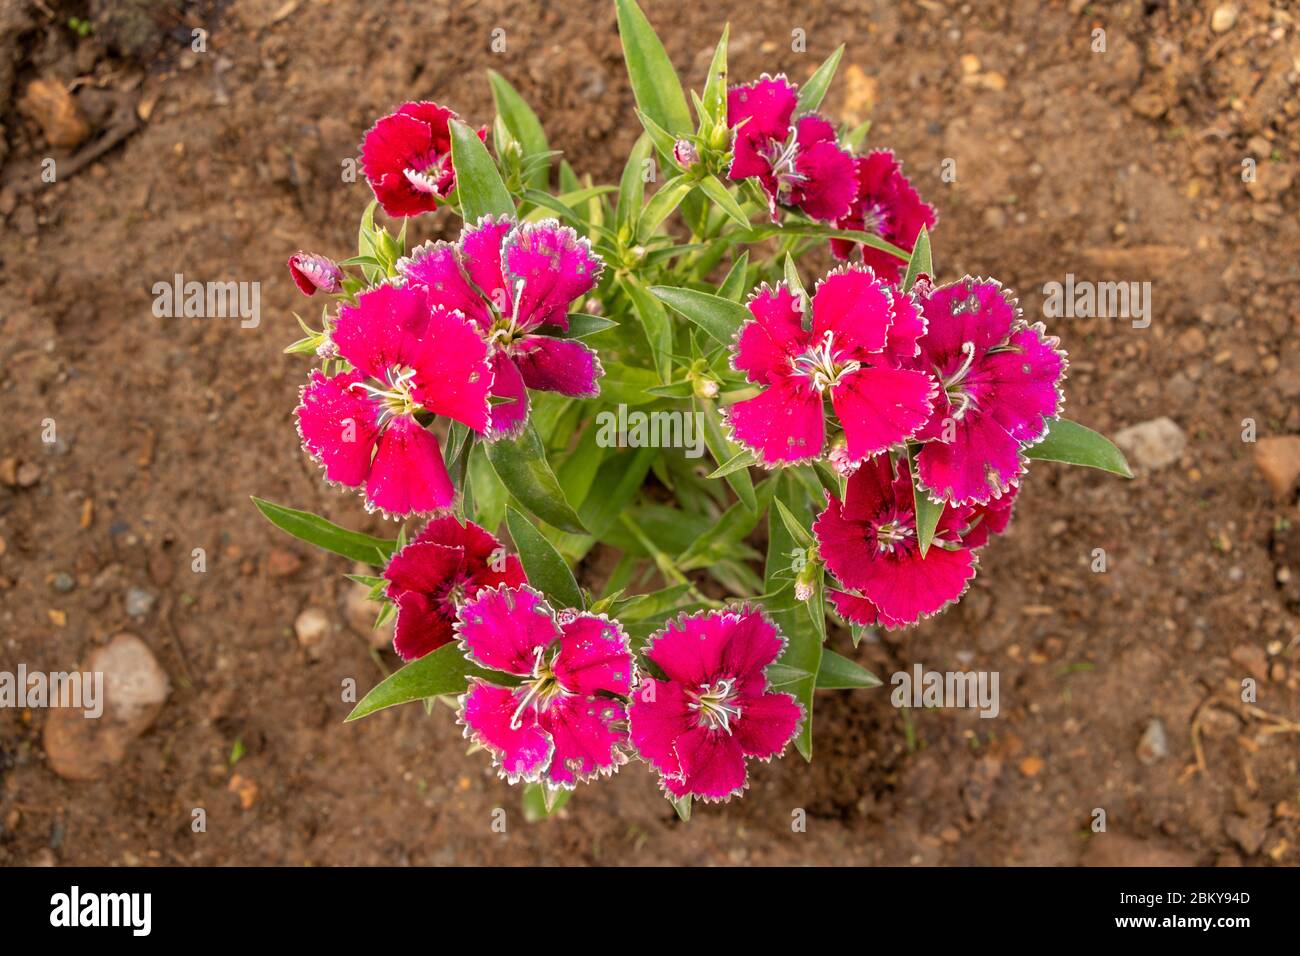 Red sweet william or dianthus barbatus  flower plant growing on soil, closeup Stock Photo